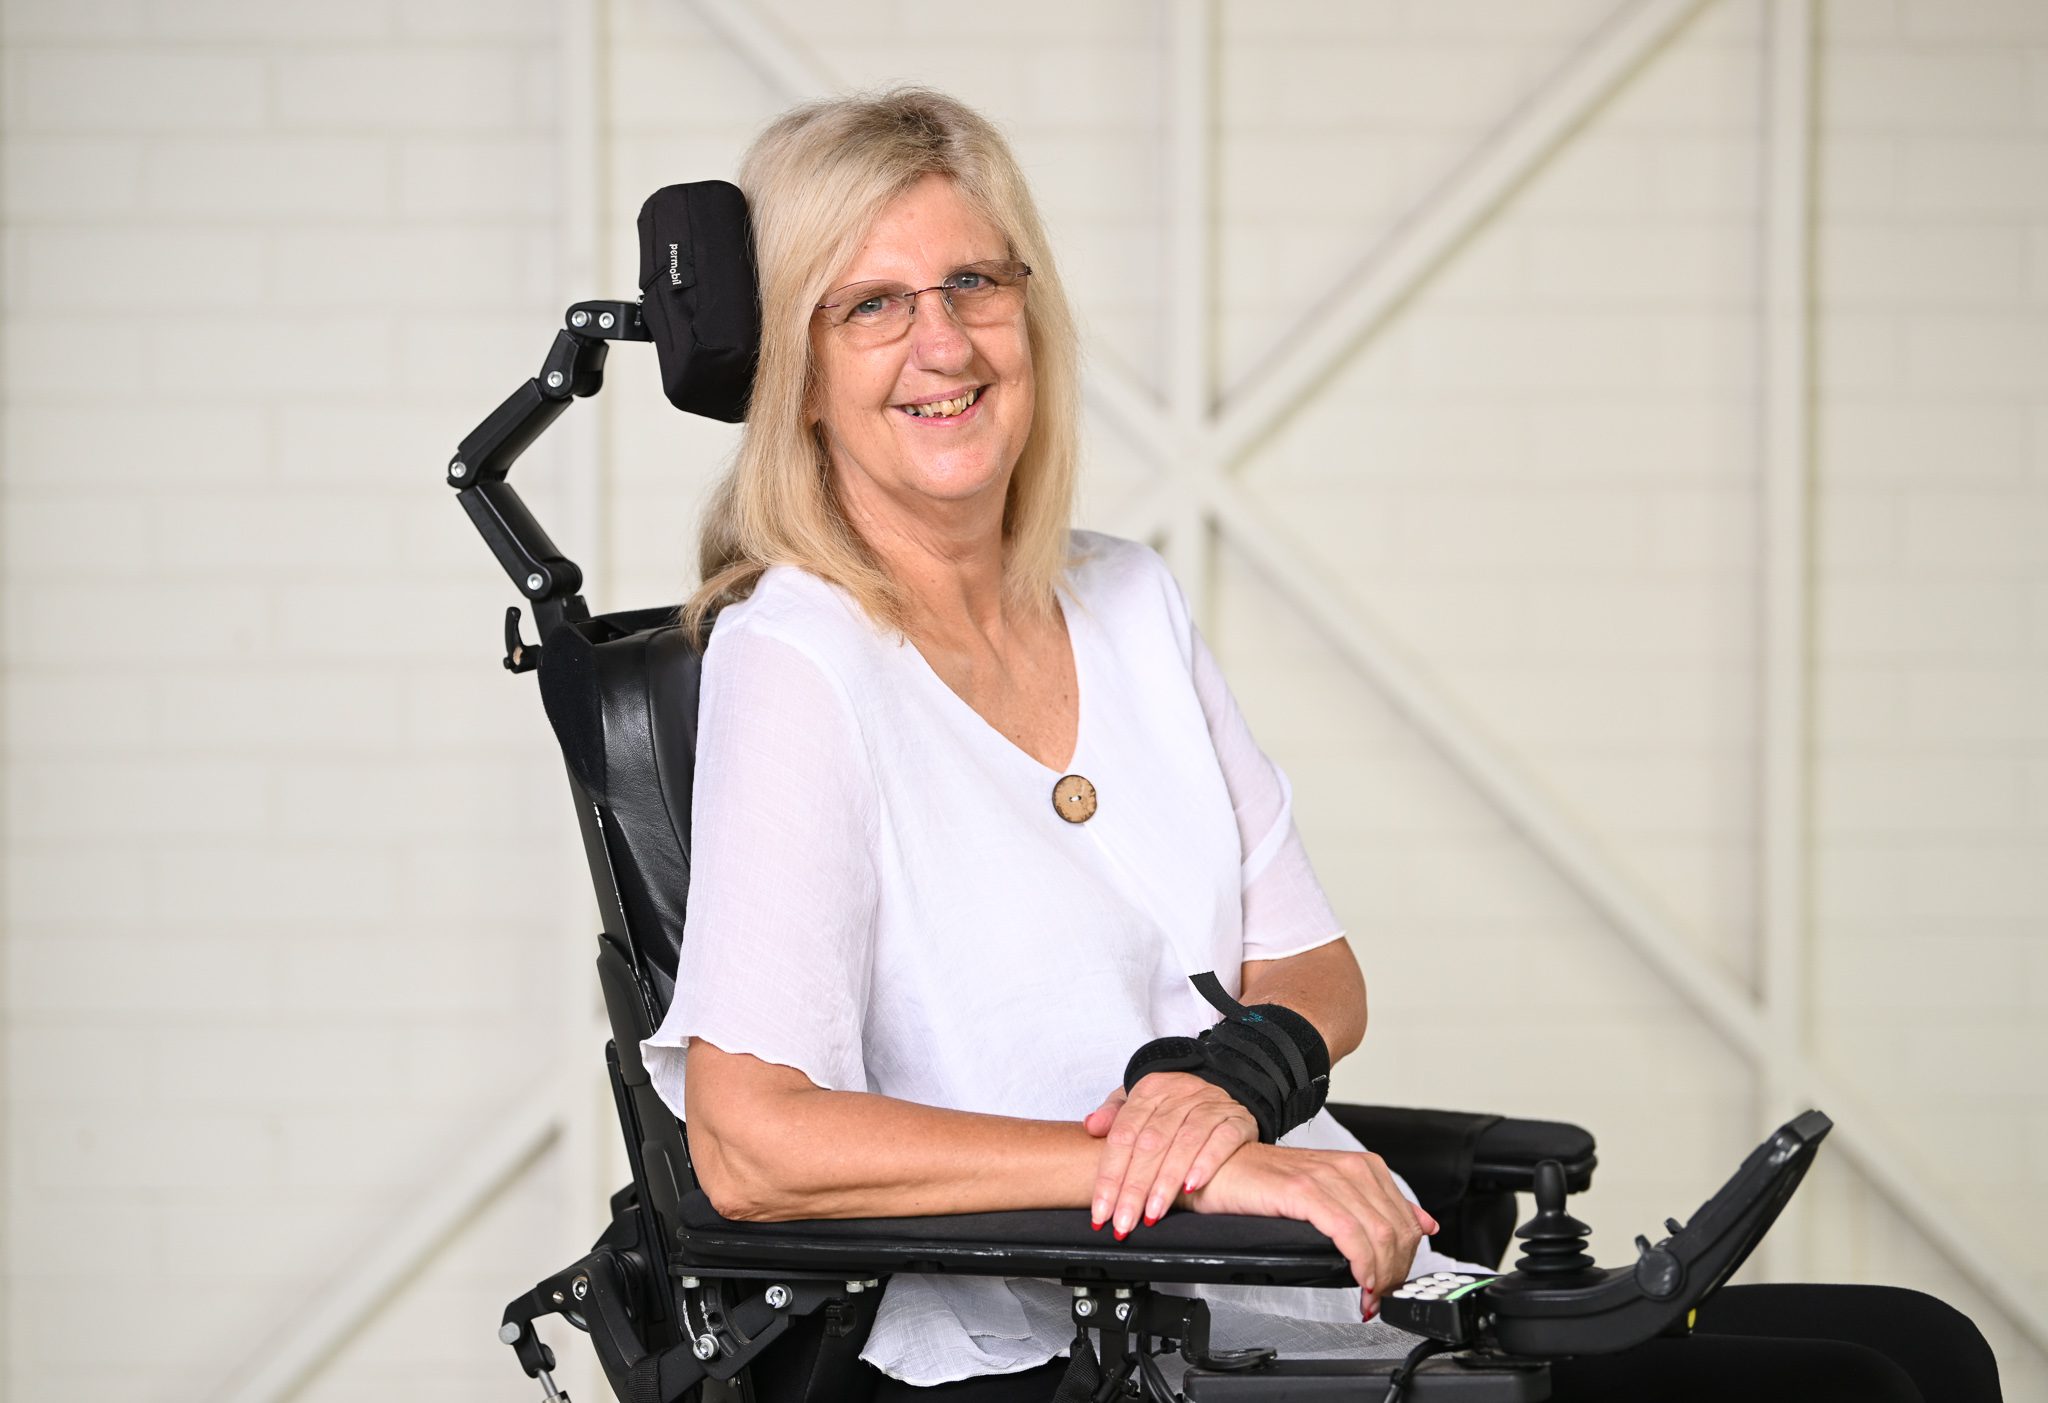 A woman with long blonde hair, wearing a white blouse, sitting in a wheelchair and looking at the camera smiling.